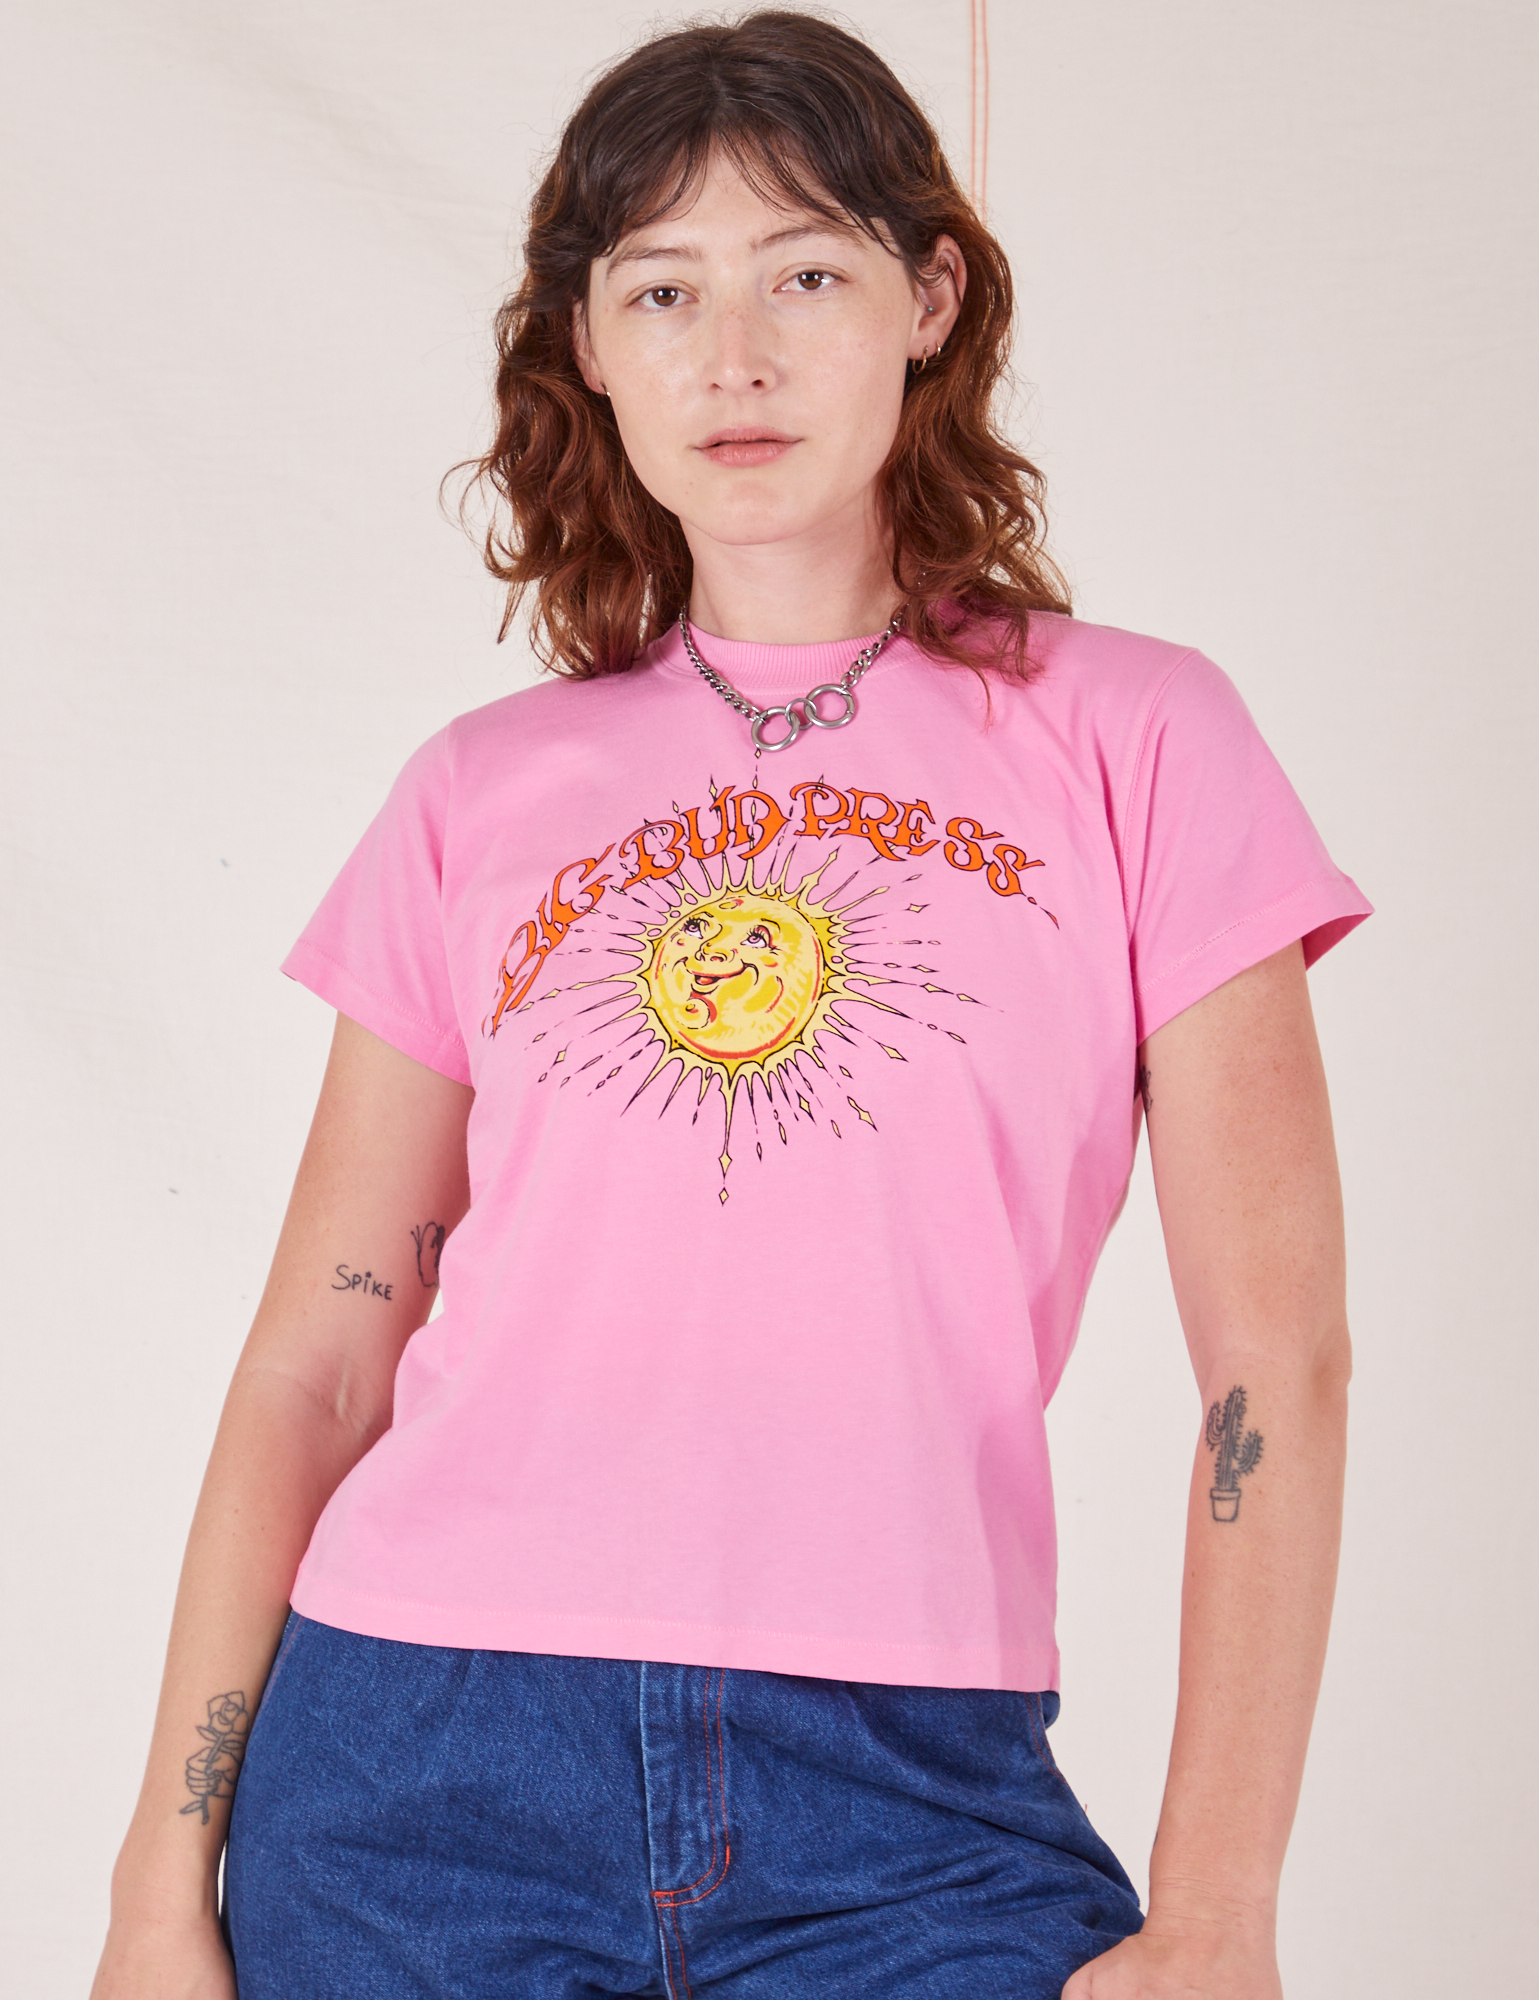 Alex is 5&#39;8&quot; and wearing P Sun Baby Organic Tee in Bubblegum Pink